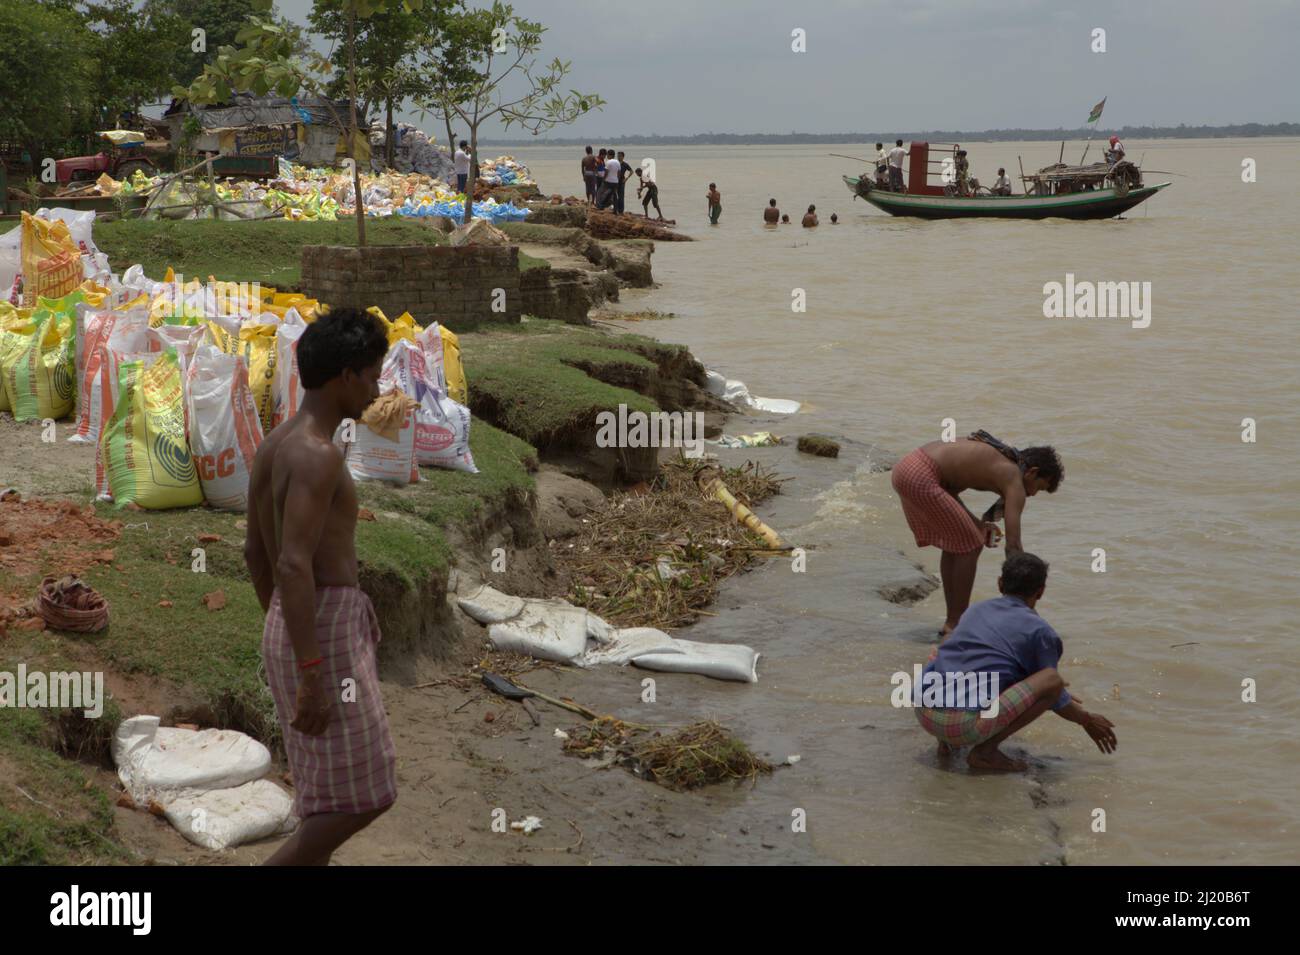 Workers of a river abrasion protection project washing themselves on the bank of Rupnarayan river as a local ferry boat was a about to land in Tamluk, Purba Medinipur, West Bengal, India. Known as Tamralipti in ancient times, Tamluk was the main gate for Nalanda-bound Buddhist pilgrims coming from the sea from Kuang-tung (now Guangzhou, China), a long sail that would need a transit in Srivijaya empire's harbours along the present-day Malacca Strait. 'On the eighth day in the second month in the fourth year of the Hsien Heng period (673 A.D.), I arrived at Tamralipti.' Stock Photo